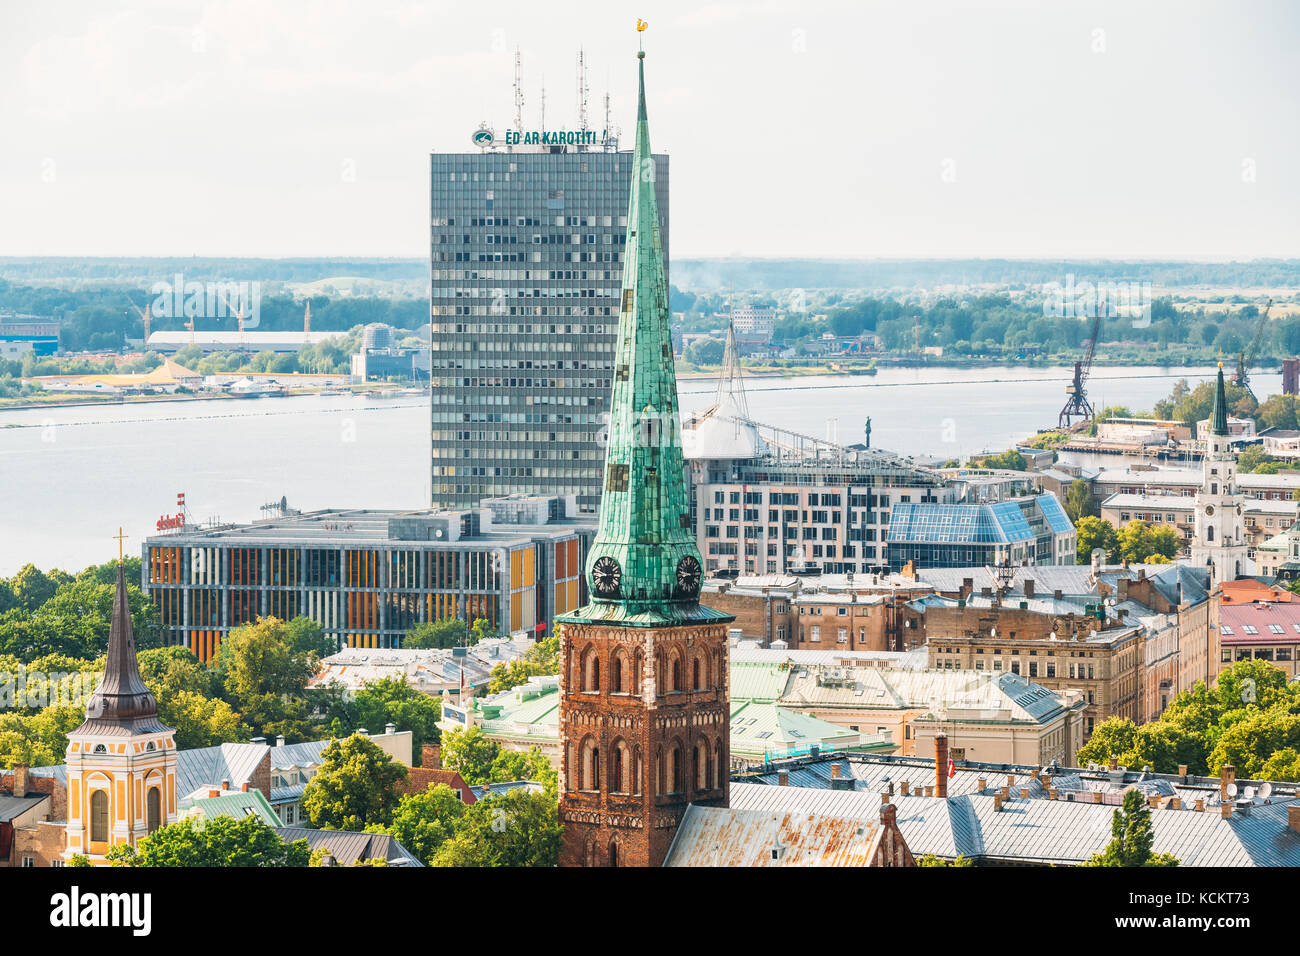 Riga, Latvia - July 1, 2016: Summer Riga Cityscape. Top View On Famous Landmark - St. James's Cathedral, or the Cathedral Basilica of St. James. The c Stock Photo